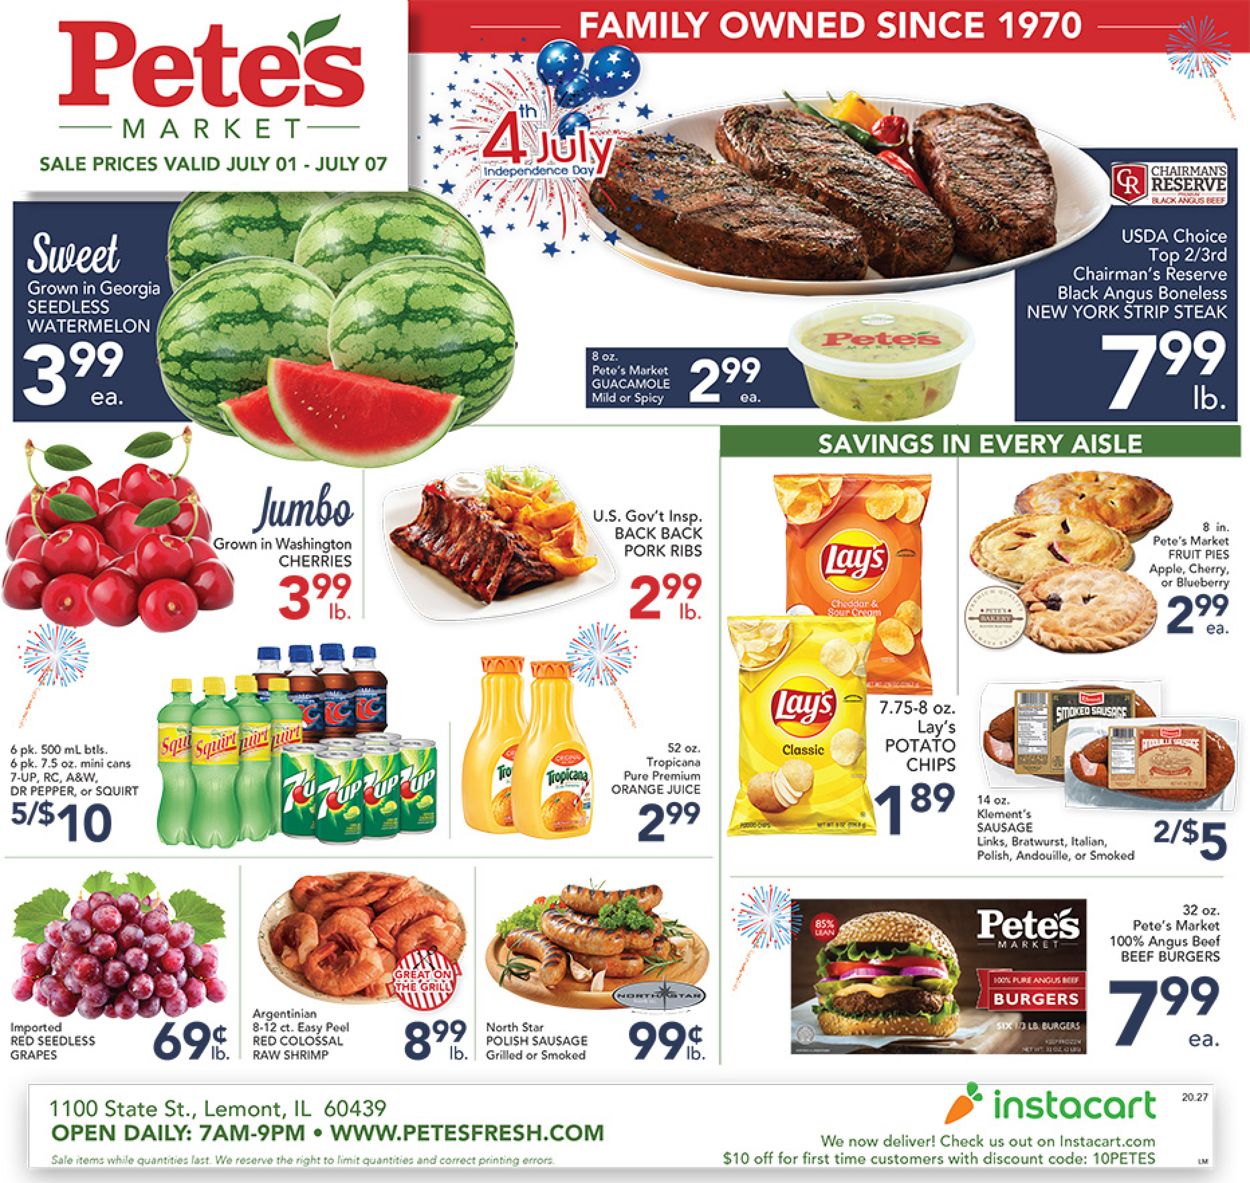 Pete's Fresh Market Current weekly ad 07/01 - 07/07/2020.